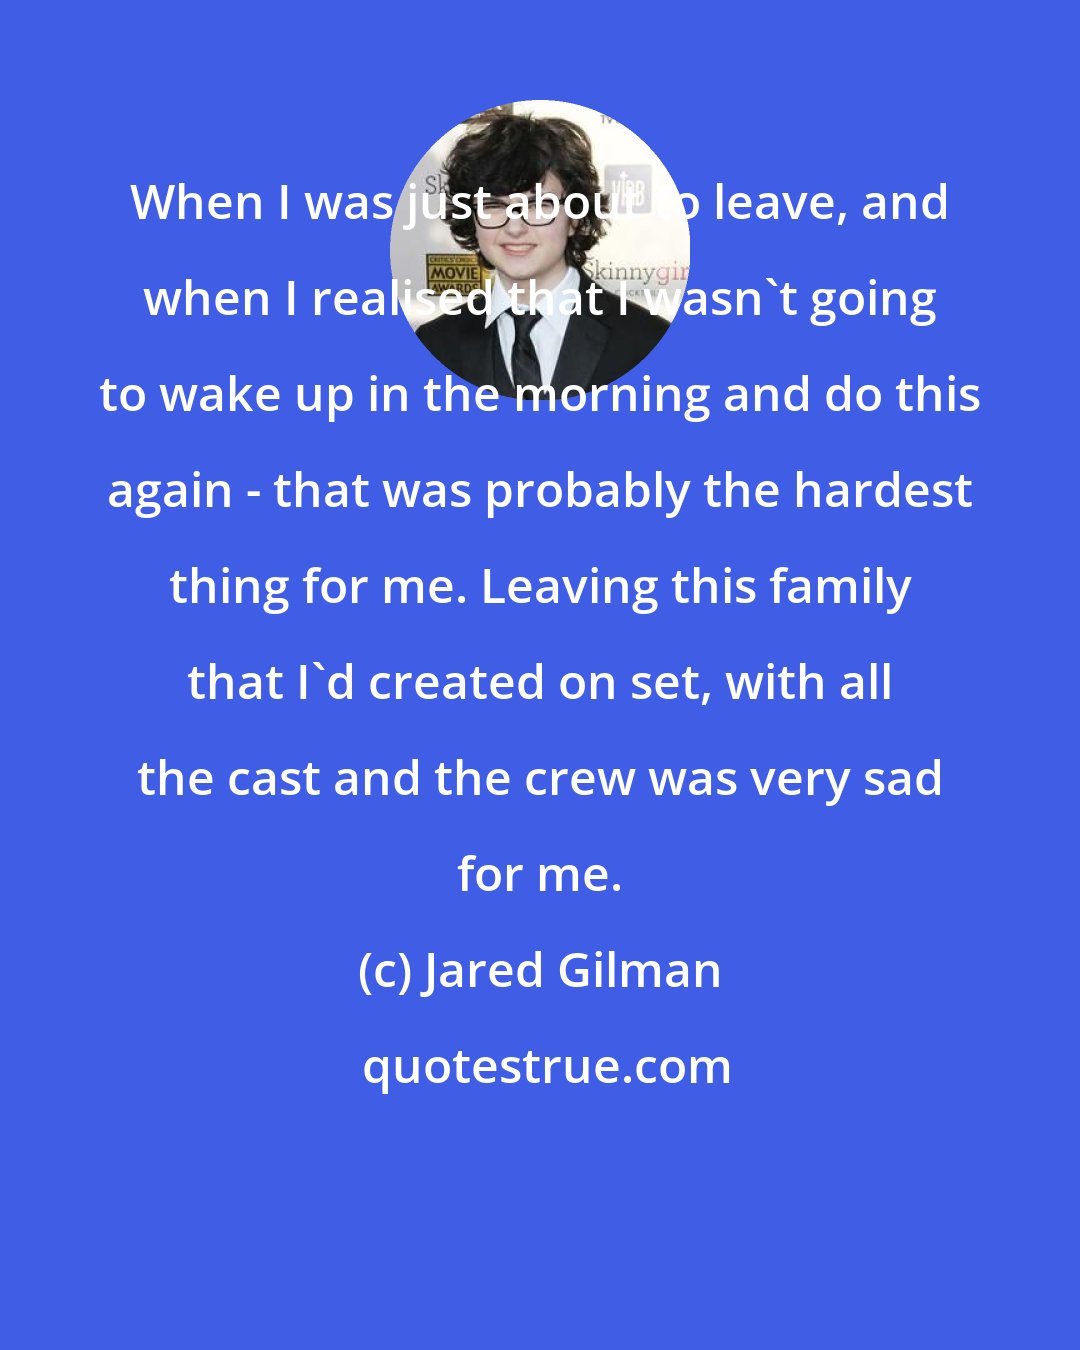 Jared Gilman: When I was just about to leave, and when I realised that I wasn't going to wake up in the morning and do this again - that was probably the hardest thing for me. Leaving this family that I'd created on set, with all the cast and the crew was very sad for me.